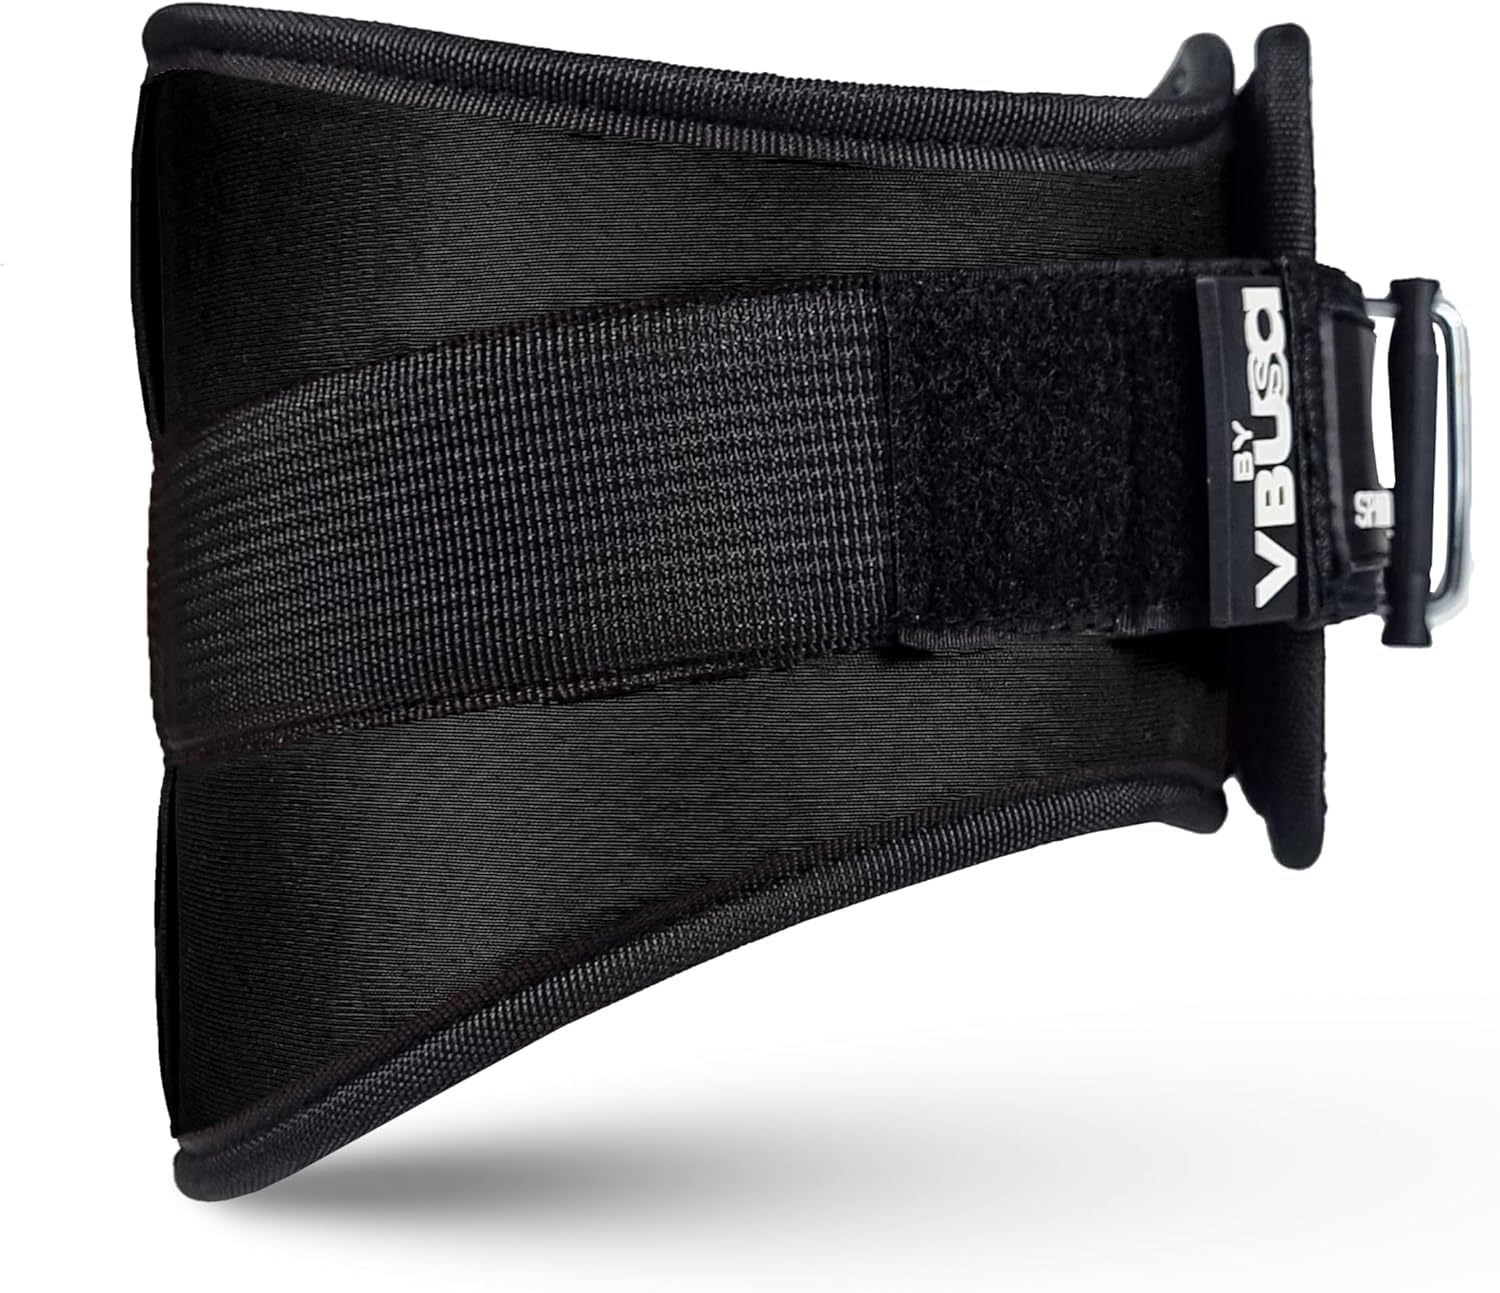 usa-spartan-weight-lifting-belt-leather